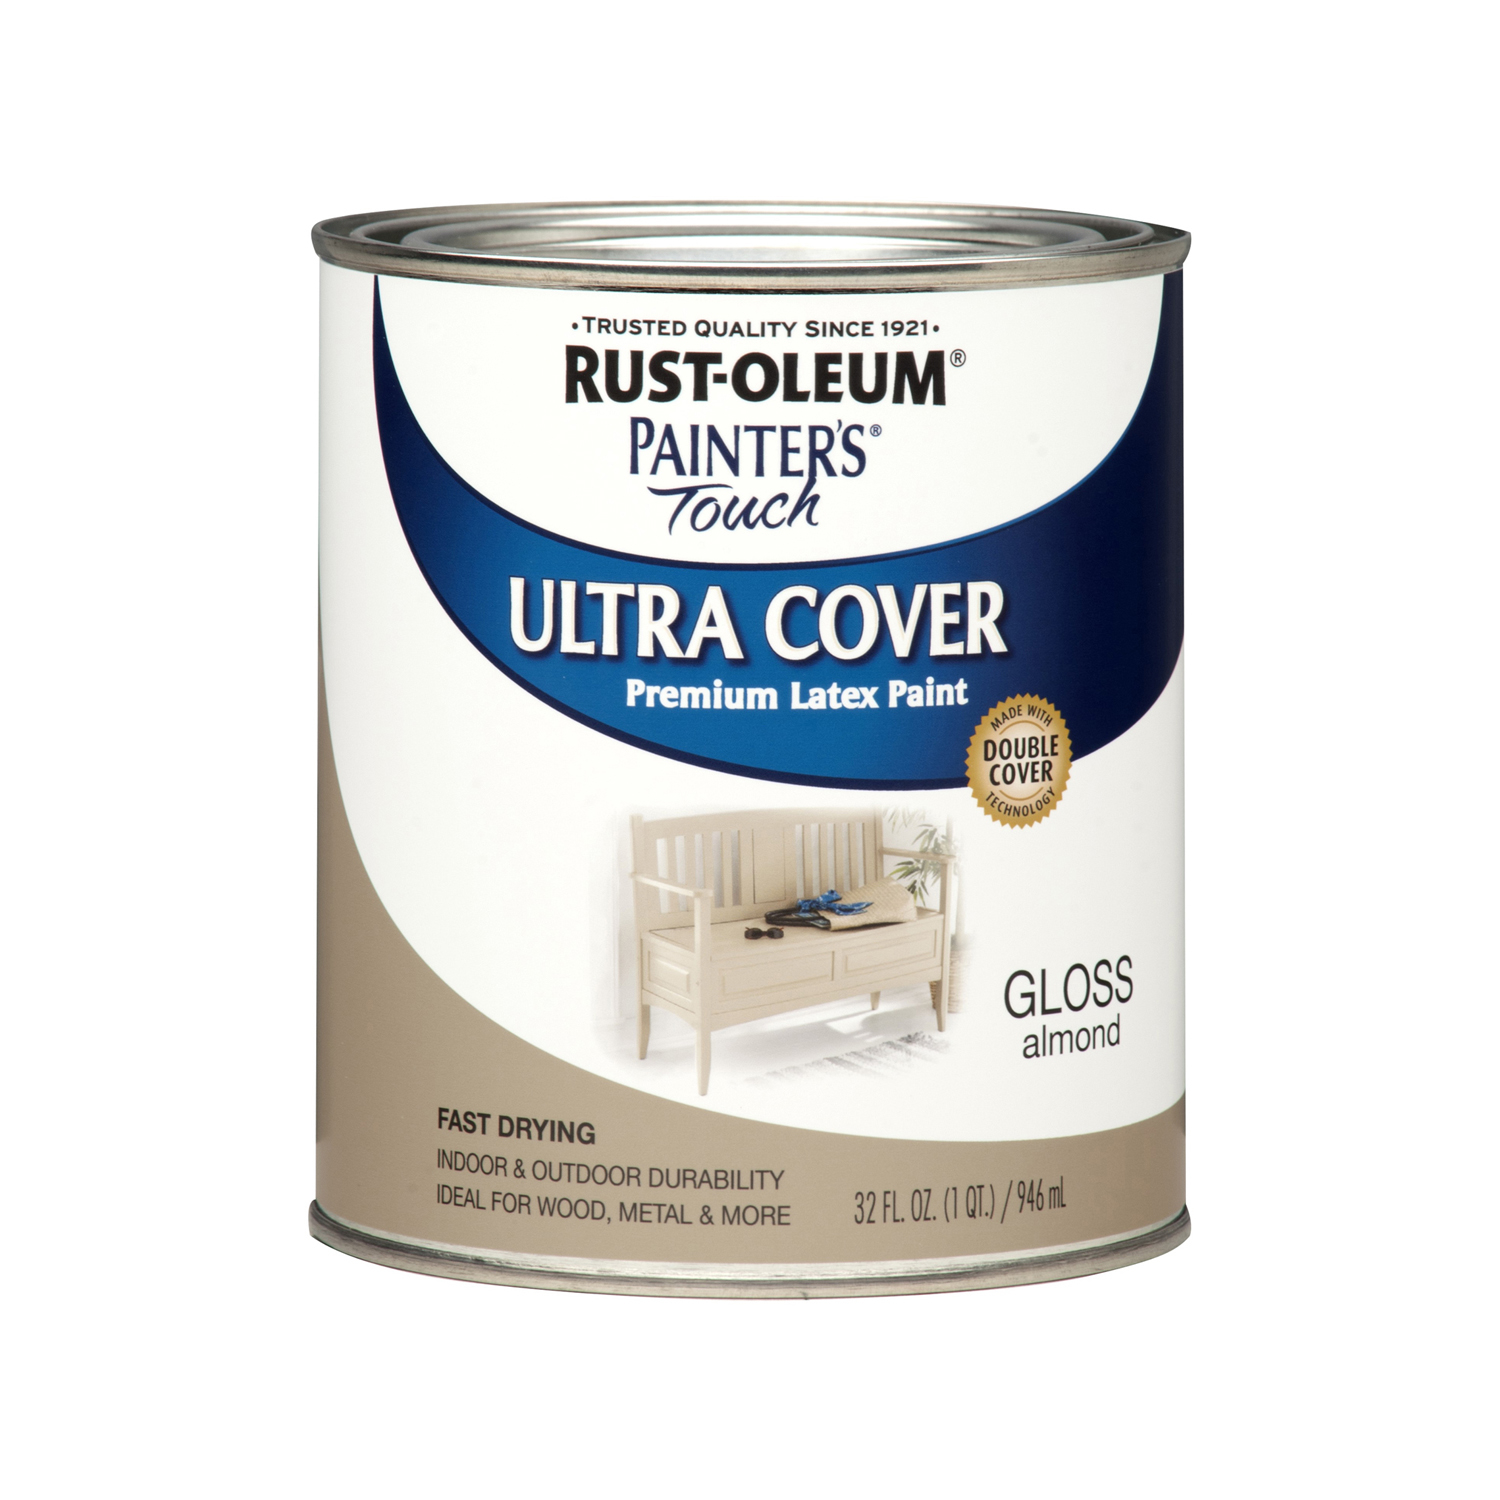 Rust-Oleum Painters Touch Ultra Cover Gloss Almond Water-Based Paint Exterior & Interior 1 qt